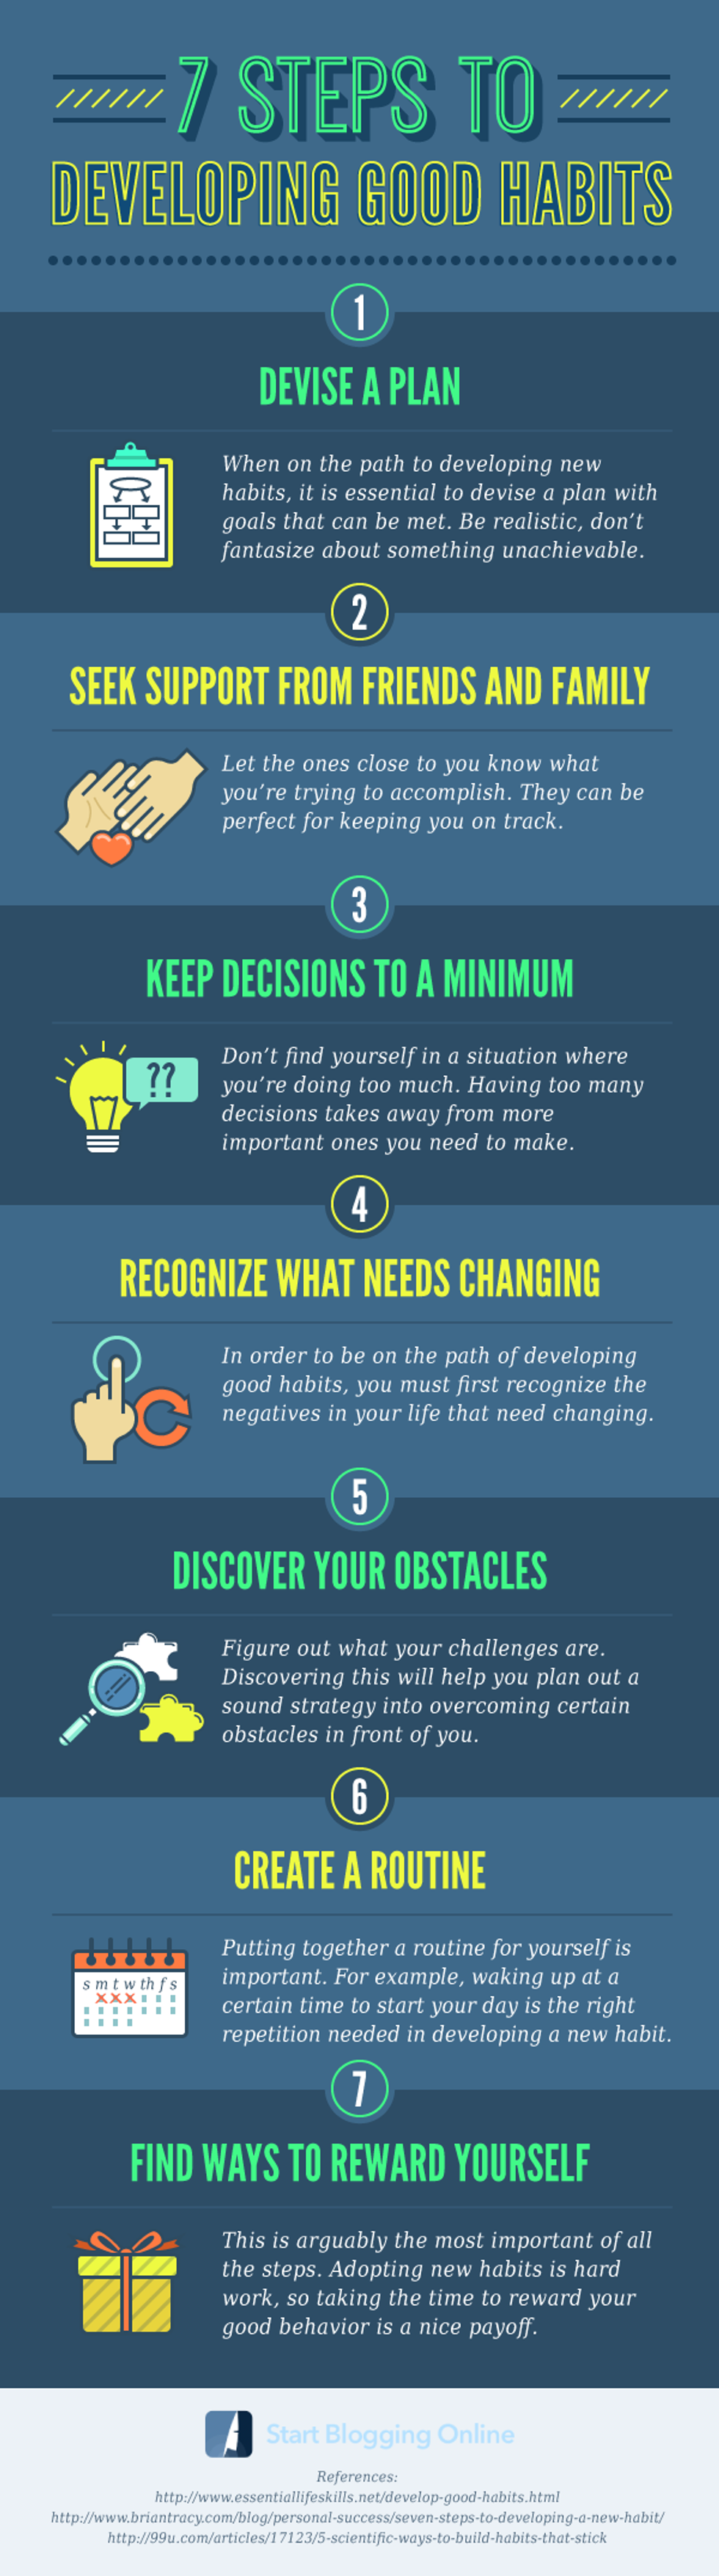 7 Steps to Developing Good Habits [Infographic]